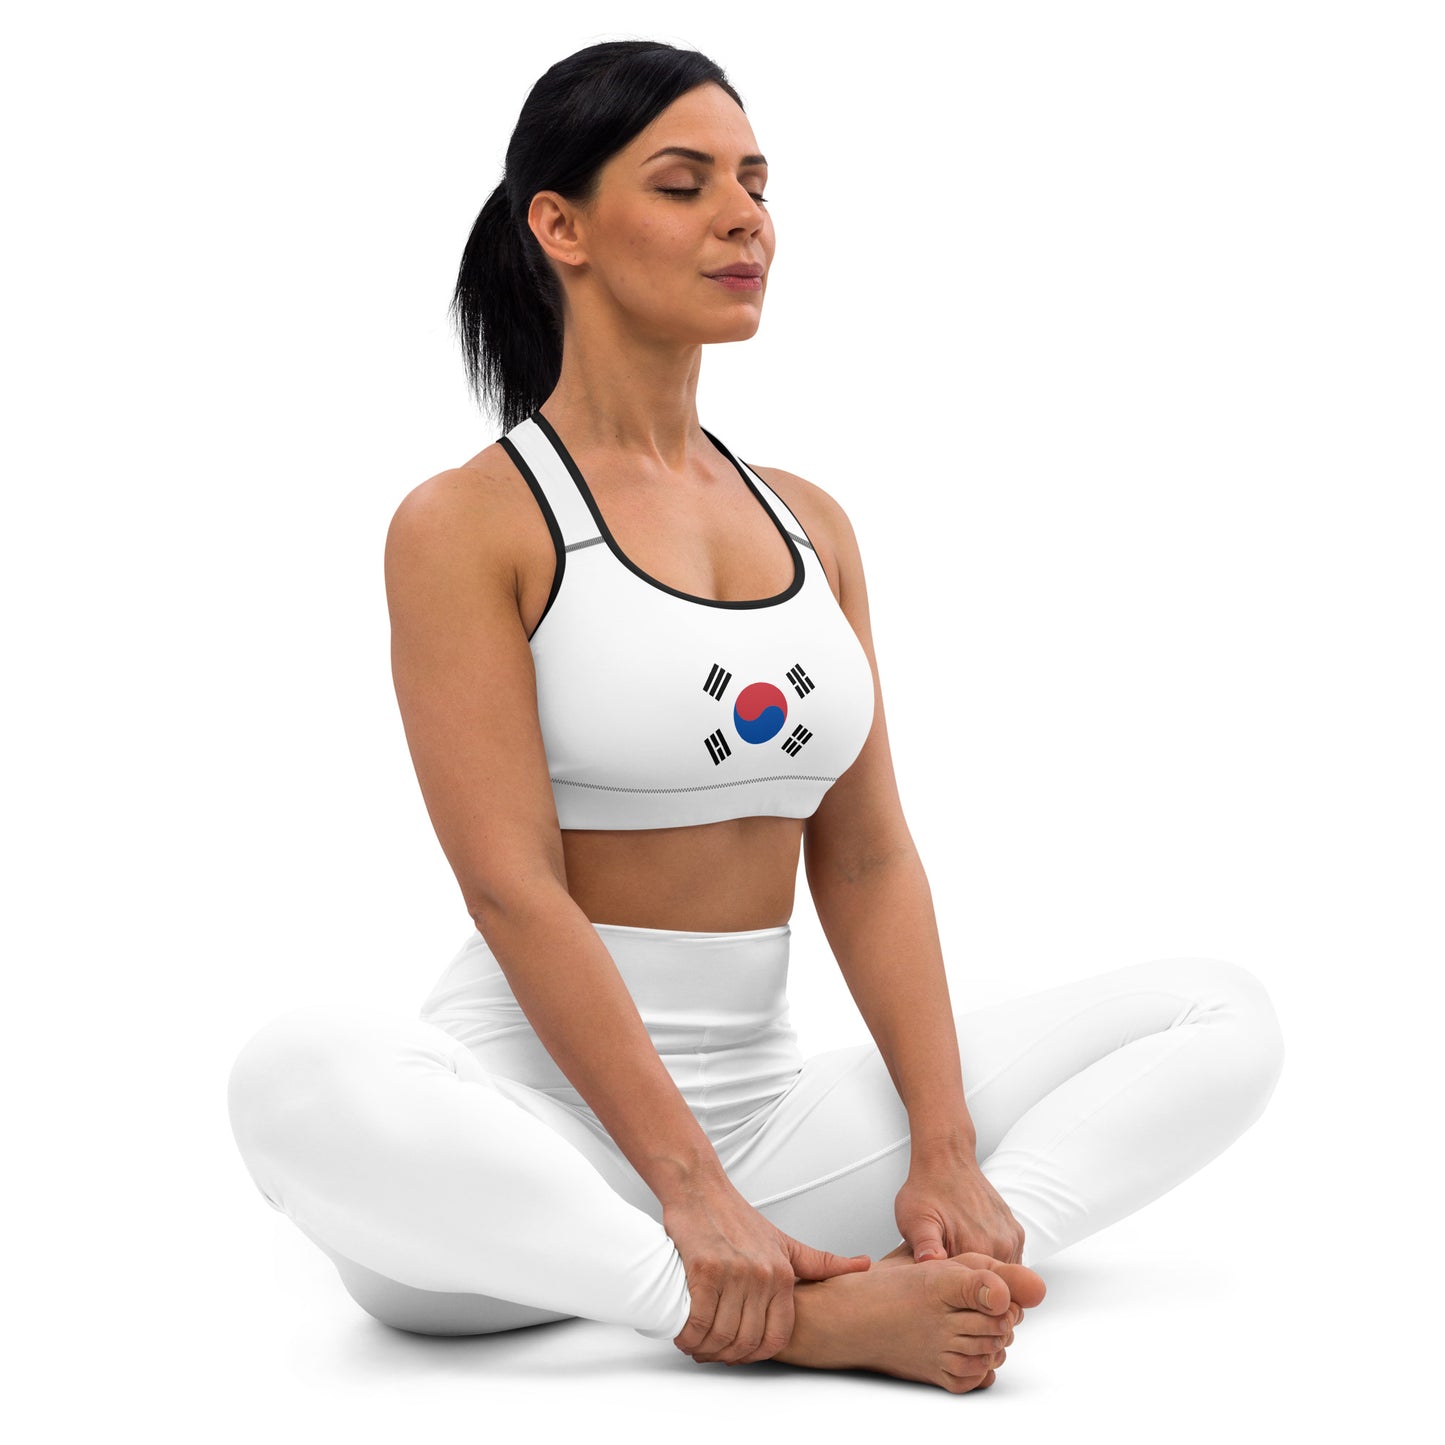 South Korean flag padded sports bra for fitness enthusiasts who love their country.